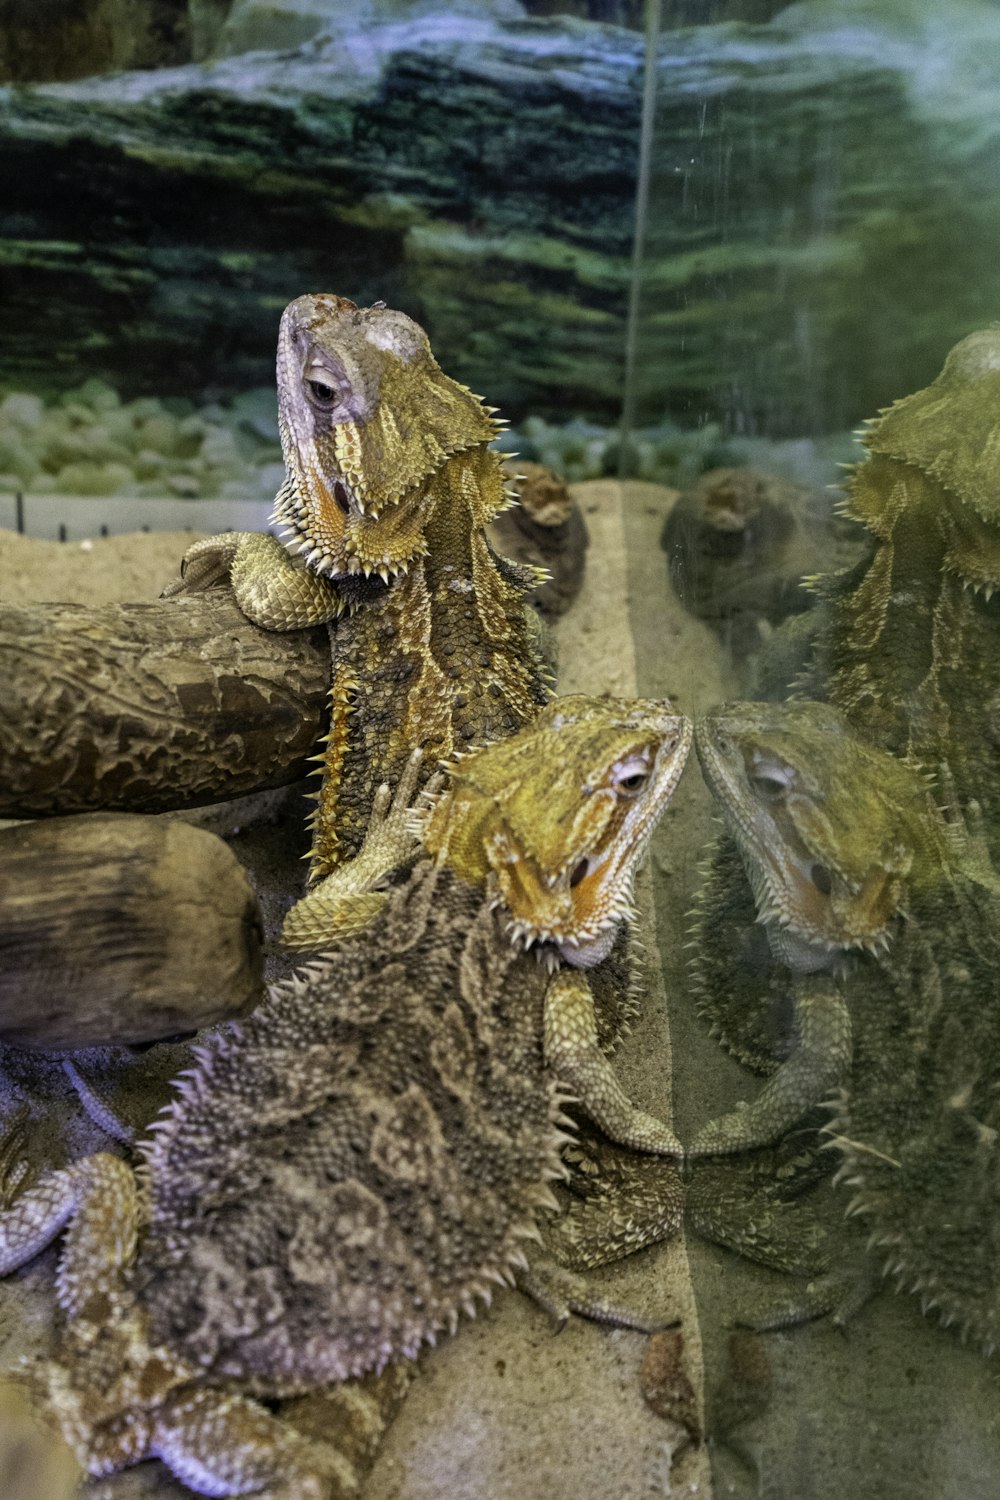 a group of lizards sitting next to each other